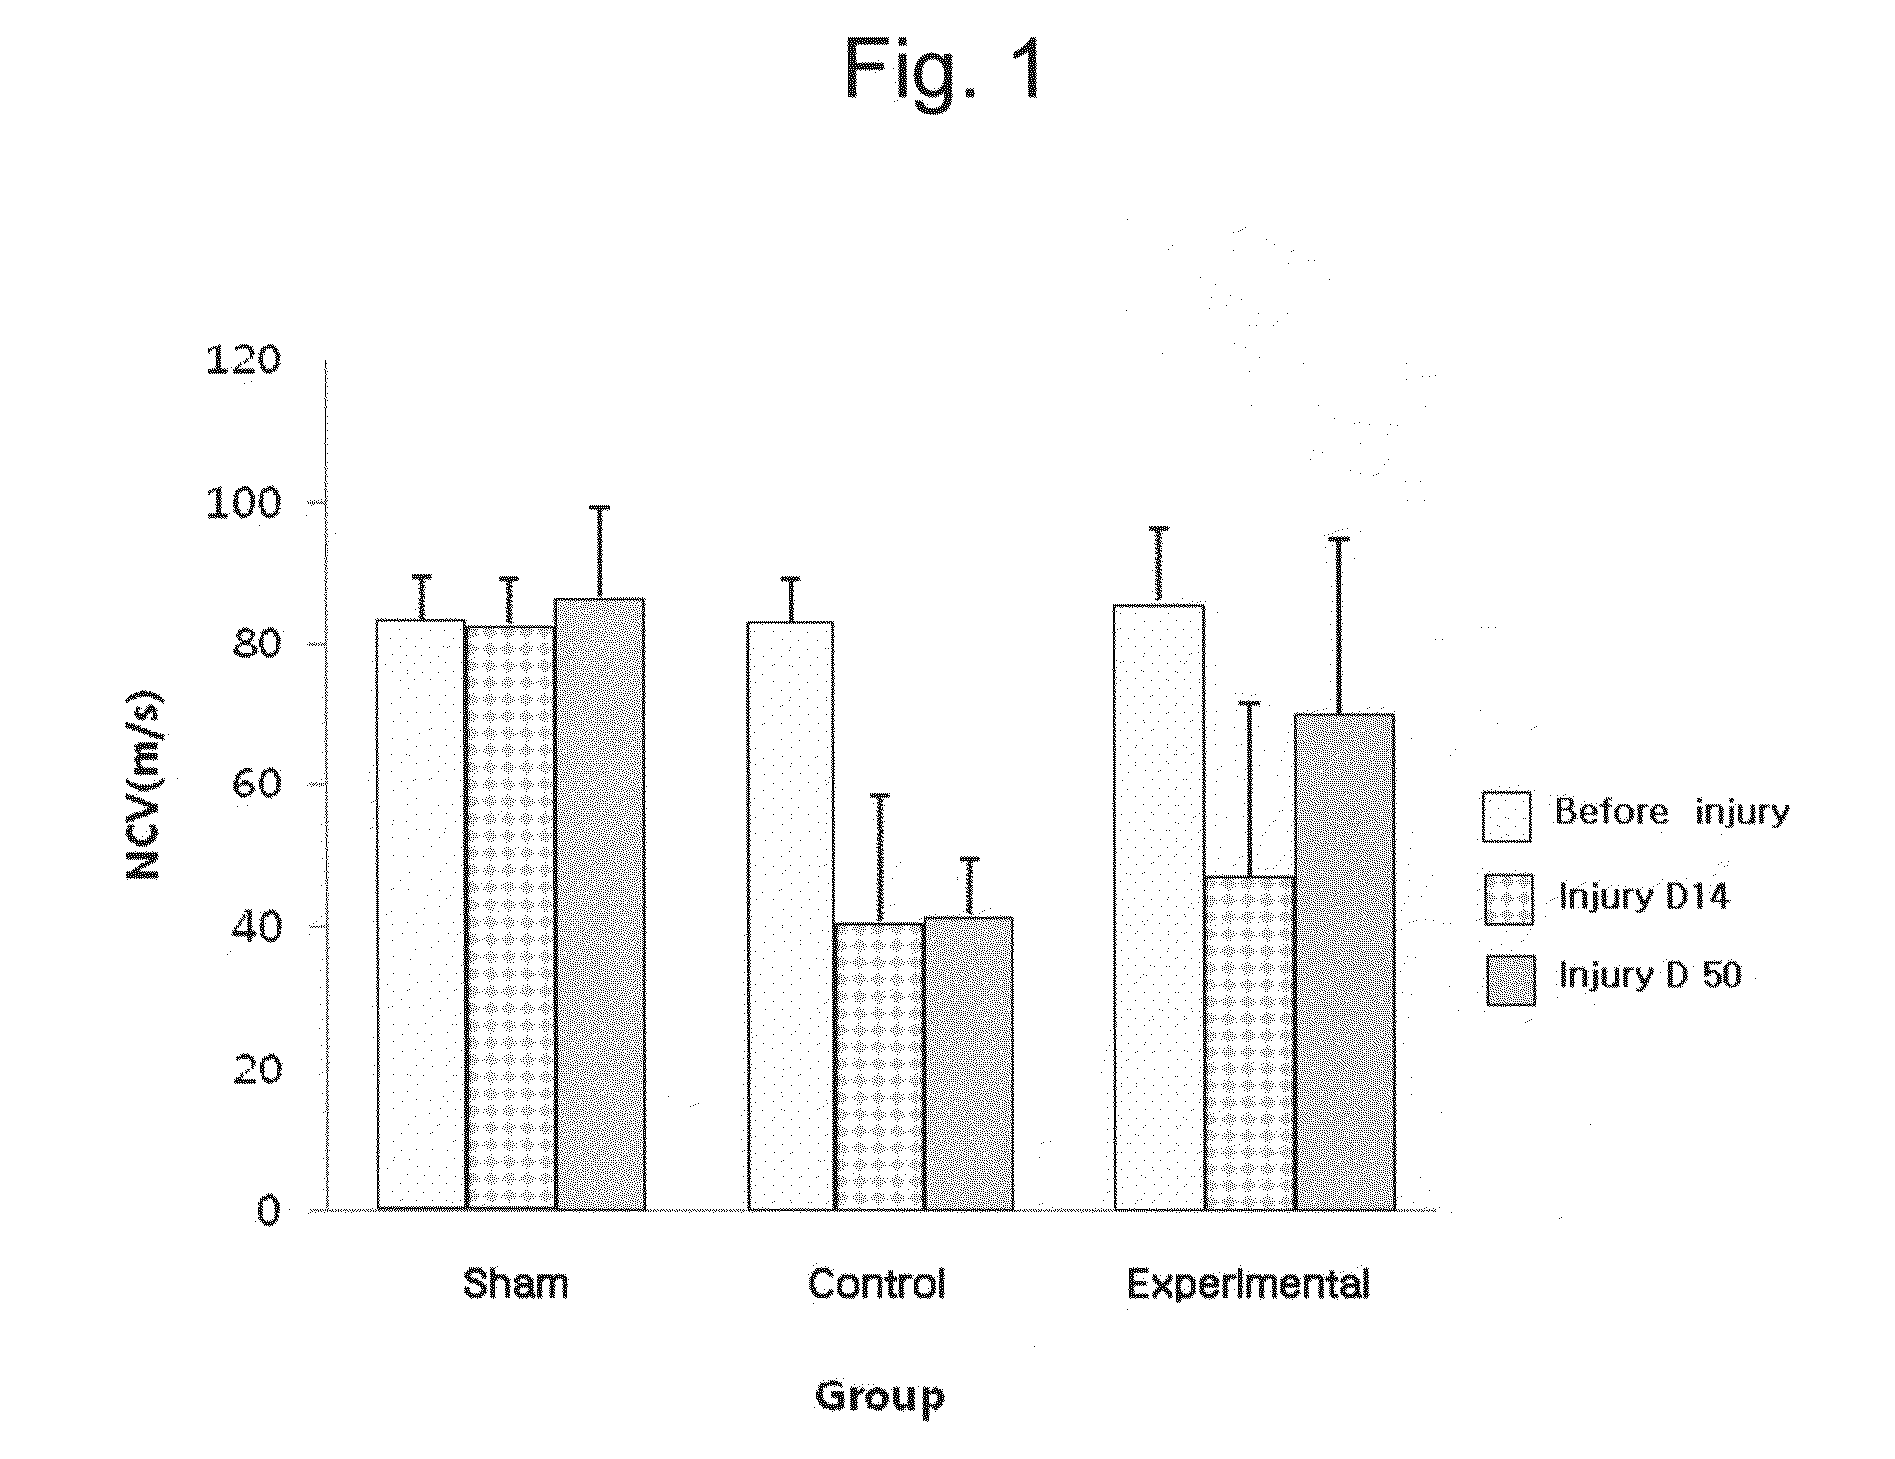 Method for treating pain induced by traumatic peripheral nerve injury by administration of G-CSF